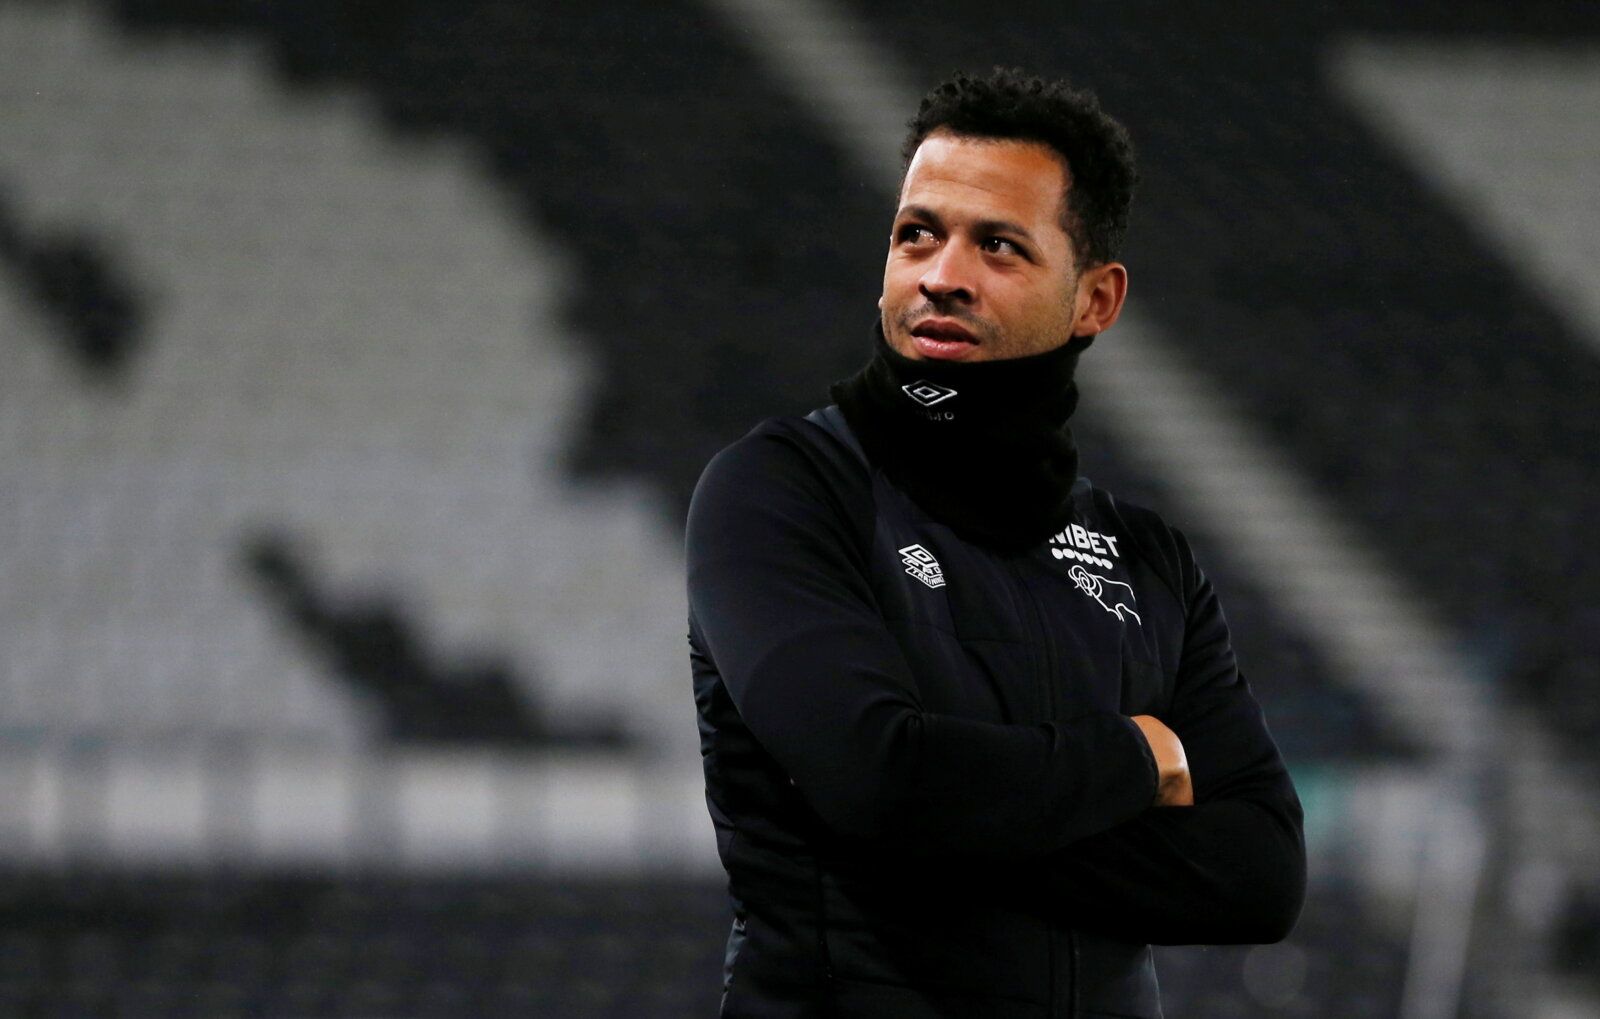 Soccer Football - Championship - Derby County v Luton Town - Pride Park, Derby, Britain - October 19, 2021   Derby County Assistant Manager Liam Rosenior   Action Images/Craig Brough    EDITORIAL USE ONLY. No use with unauthorized audio, video, data, fixture lists, club/league logos or 